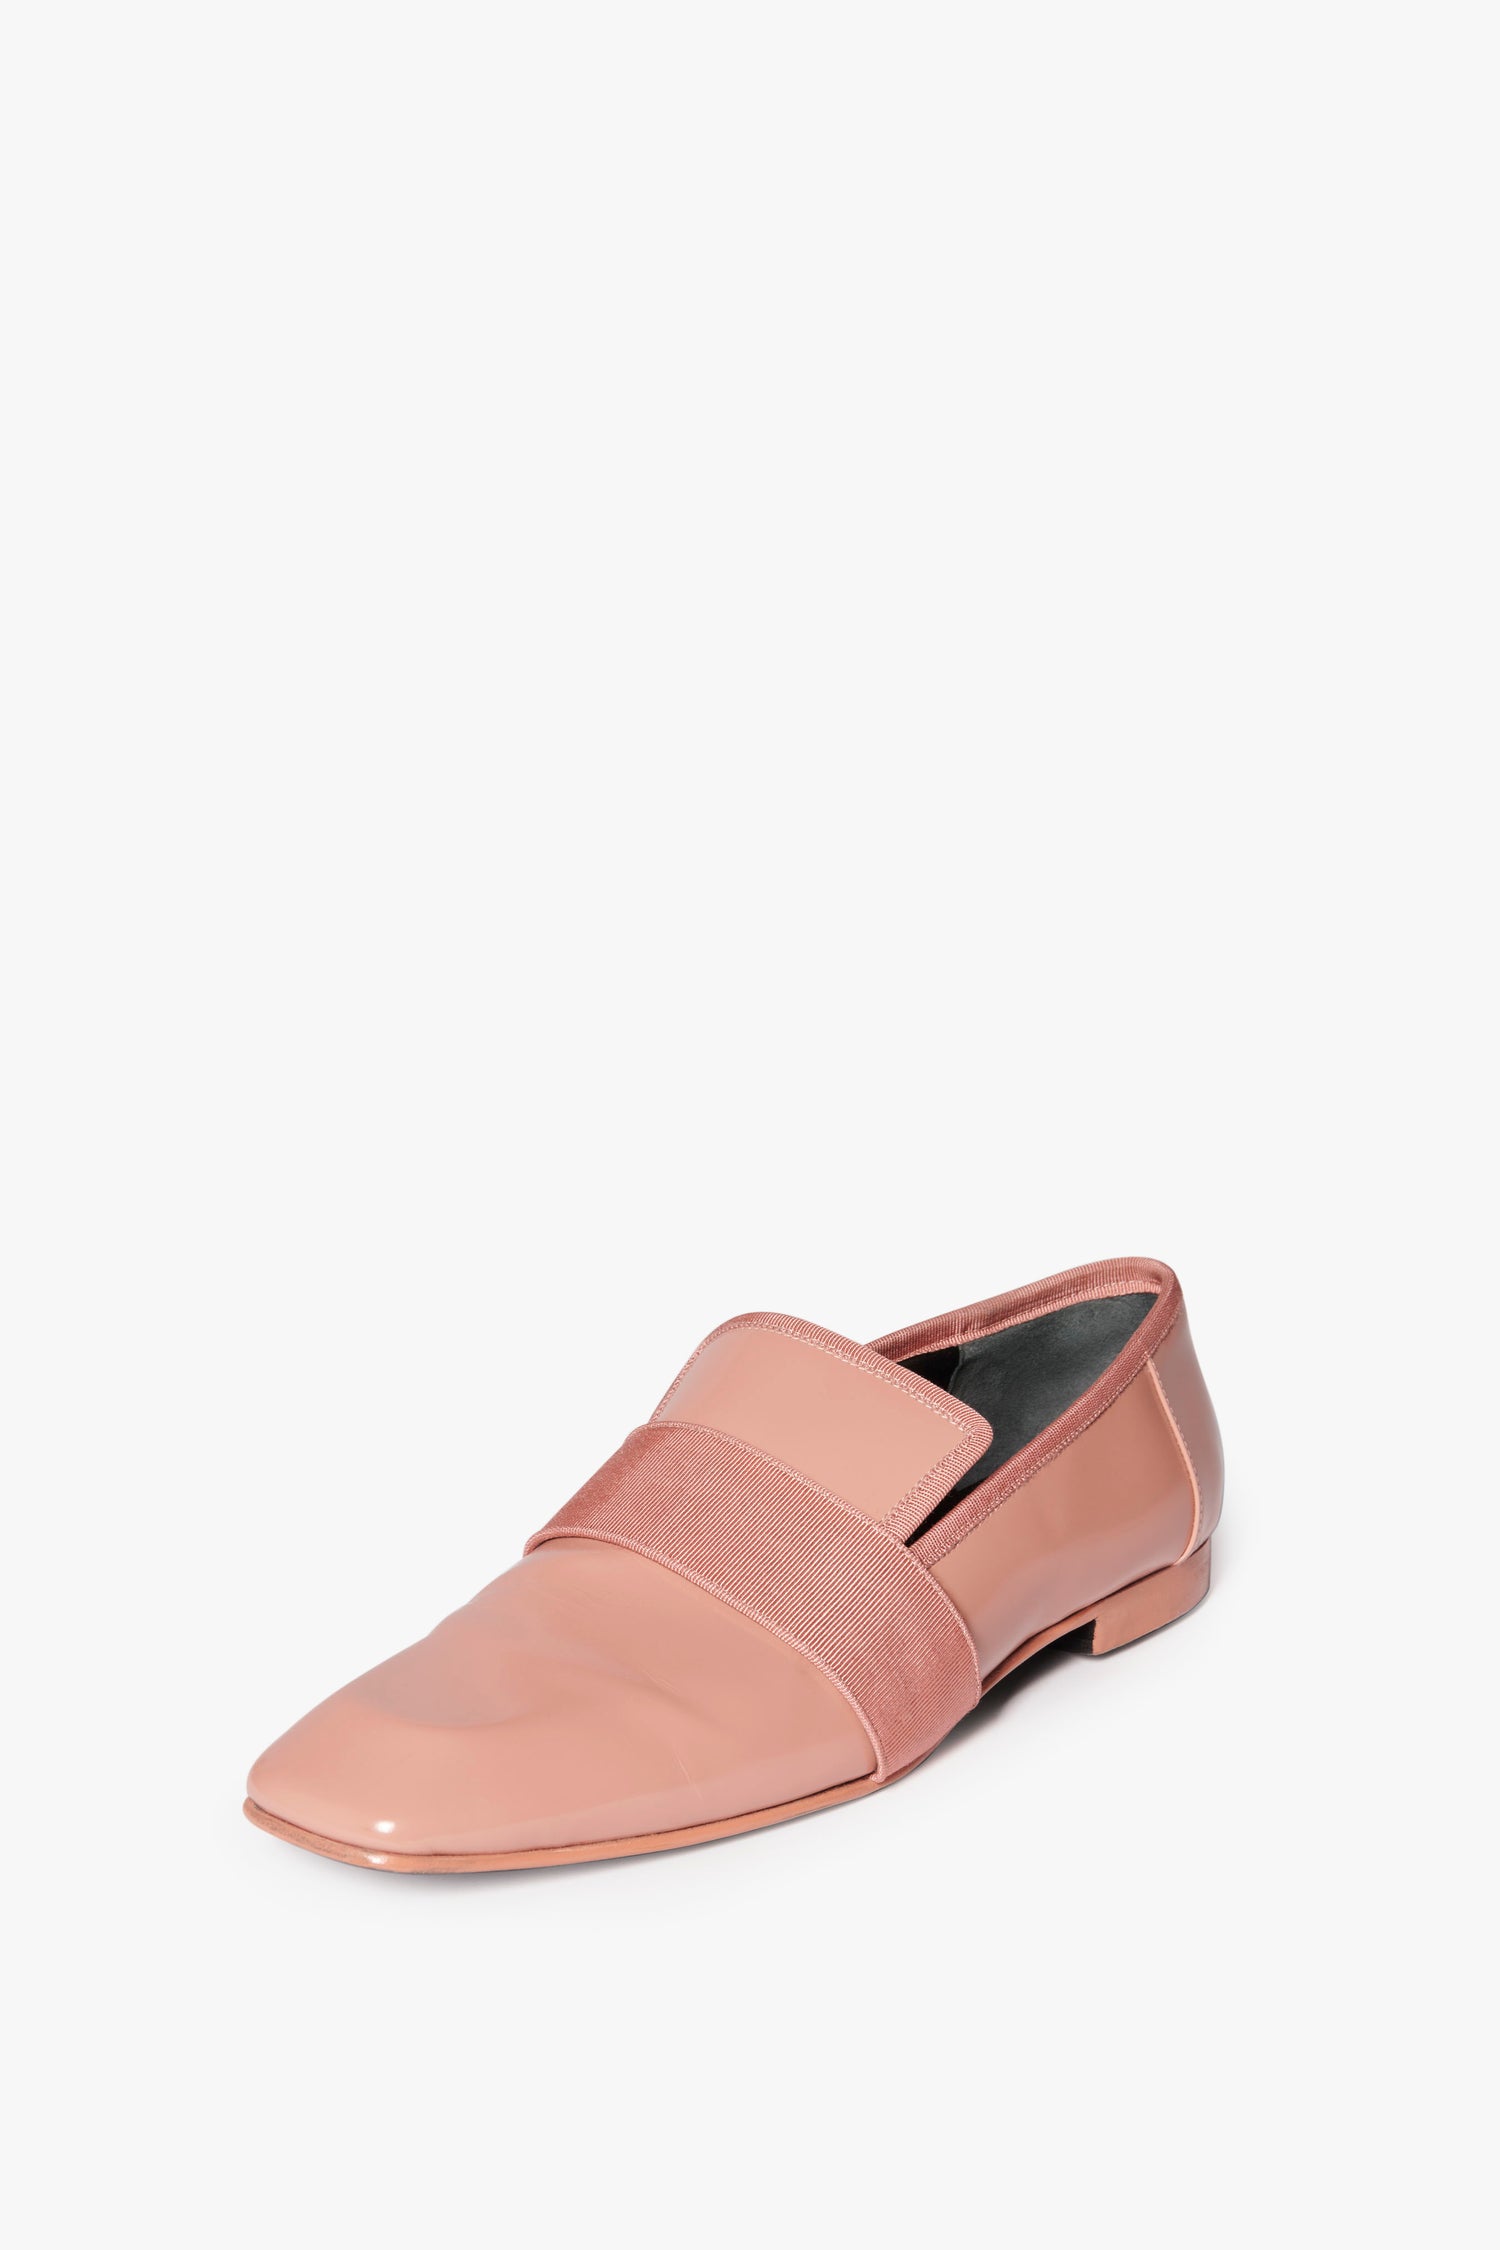 A single Debbie Loafer in Rose by Victoria Beckham, featuring a wide, pink fabric band across the upper and a chic square-toe design, placed on a plain white background.